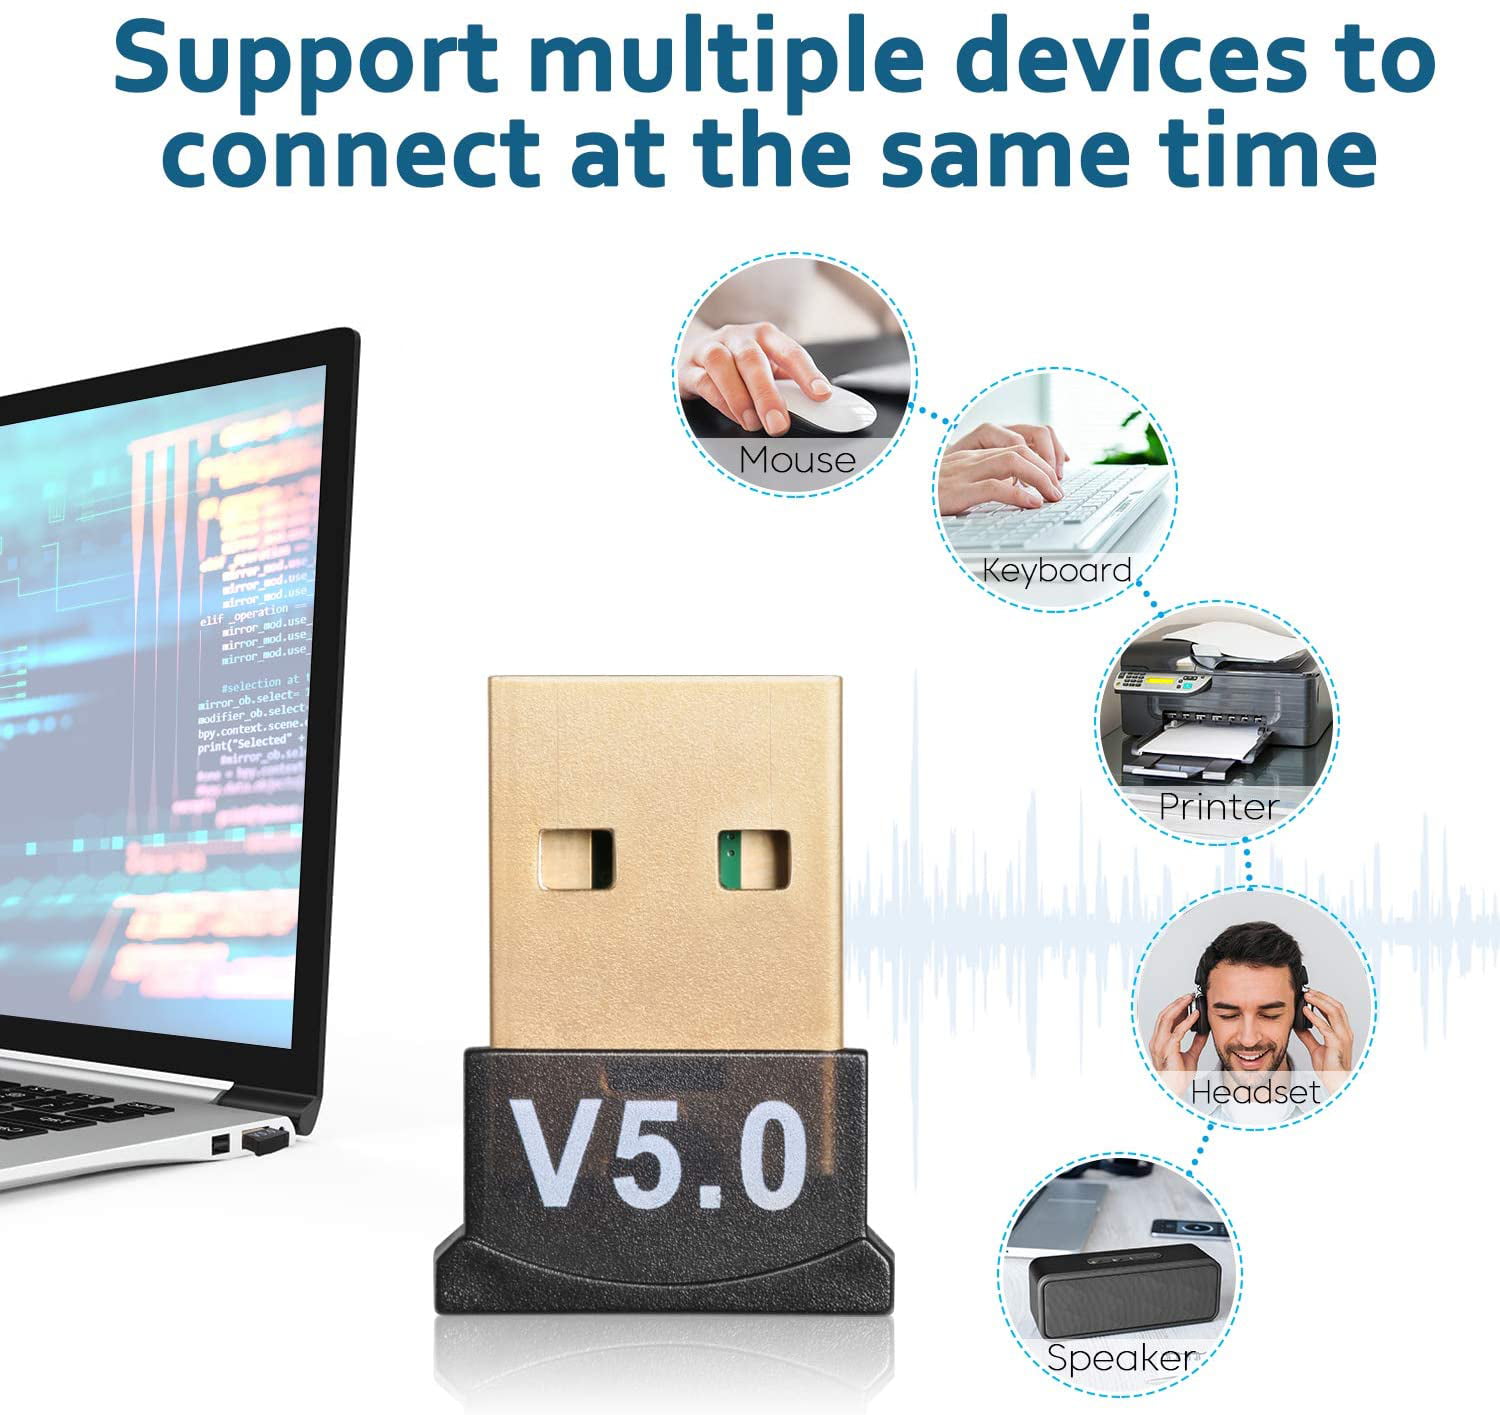 V88R®USB Bluetooth Adapter/Dongle for PC 5.0 Bluetooth Dongle Receiver  Support Window 11/10/8.1/8/7 for Desktop Laptop, Printers, Keyboard, Mouse,  Headsets, Speakers - USB Bluetooth 5.0 Dongle - Buy V88R®USB Bluetooth  Adapter/Dongle for PC